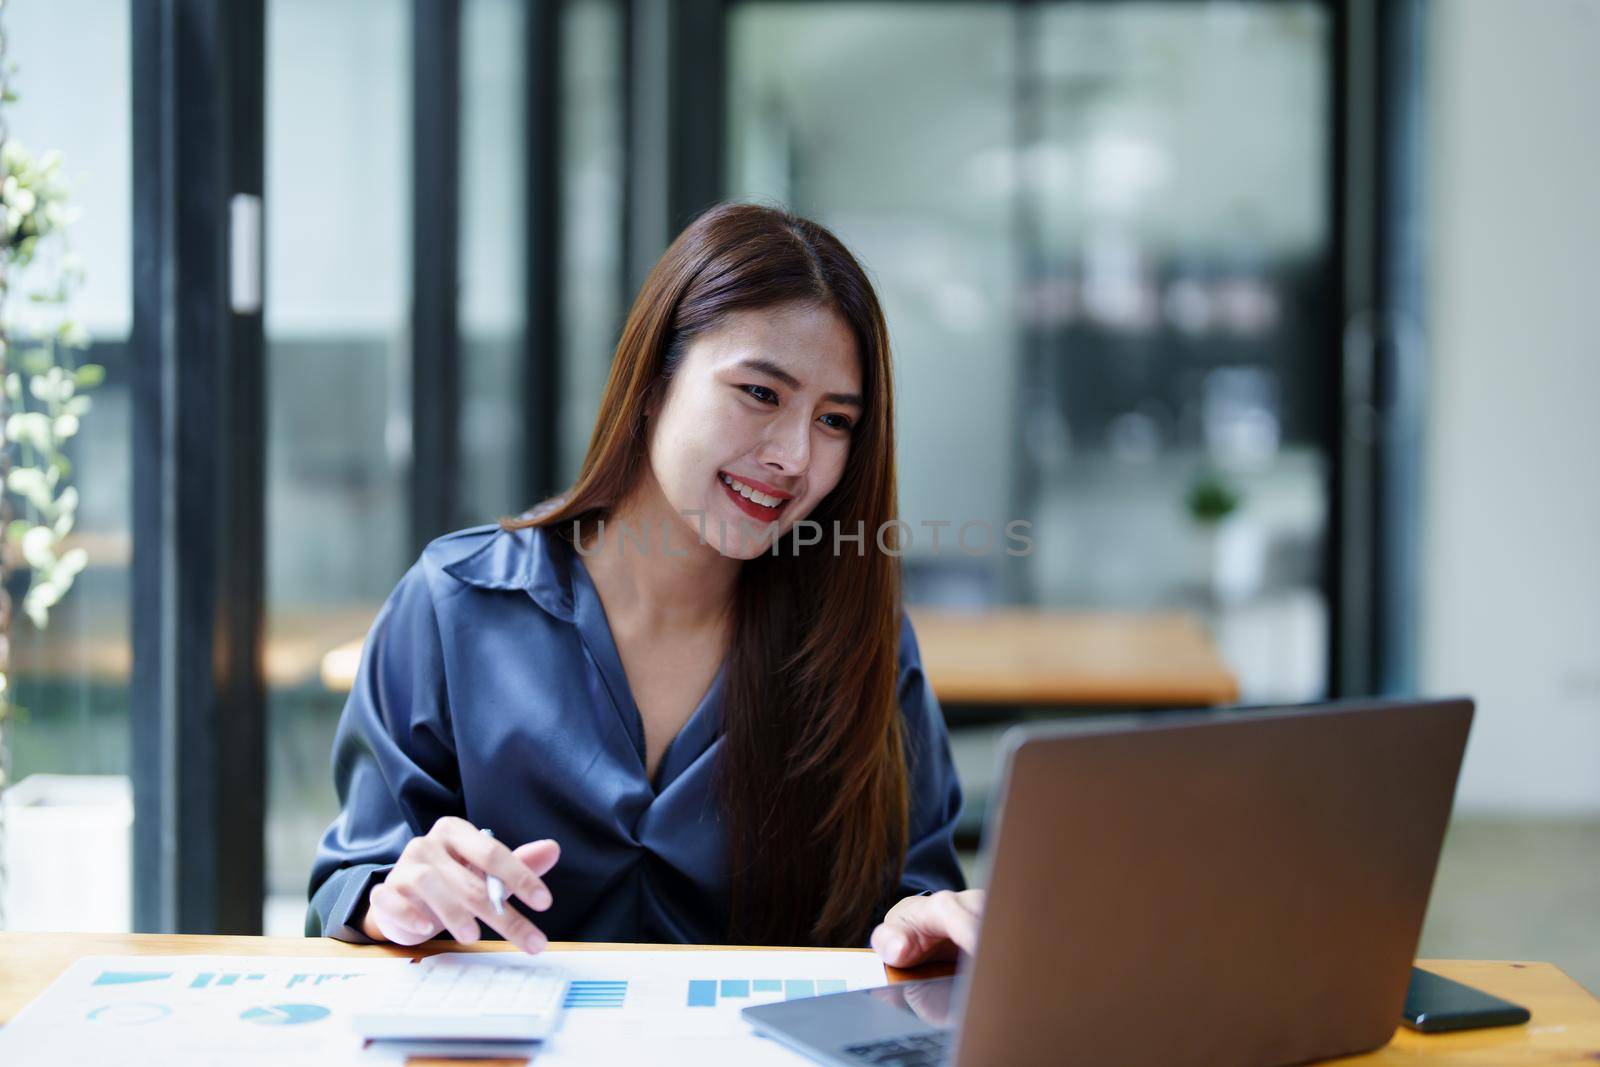 Portrait of an Asian female employee using computer with a smiling face as she works the next morning by Manastrong